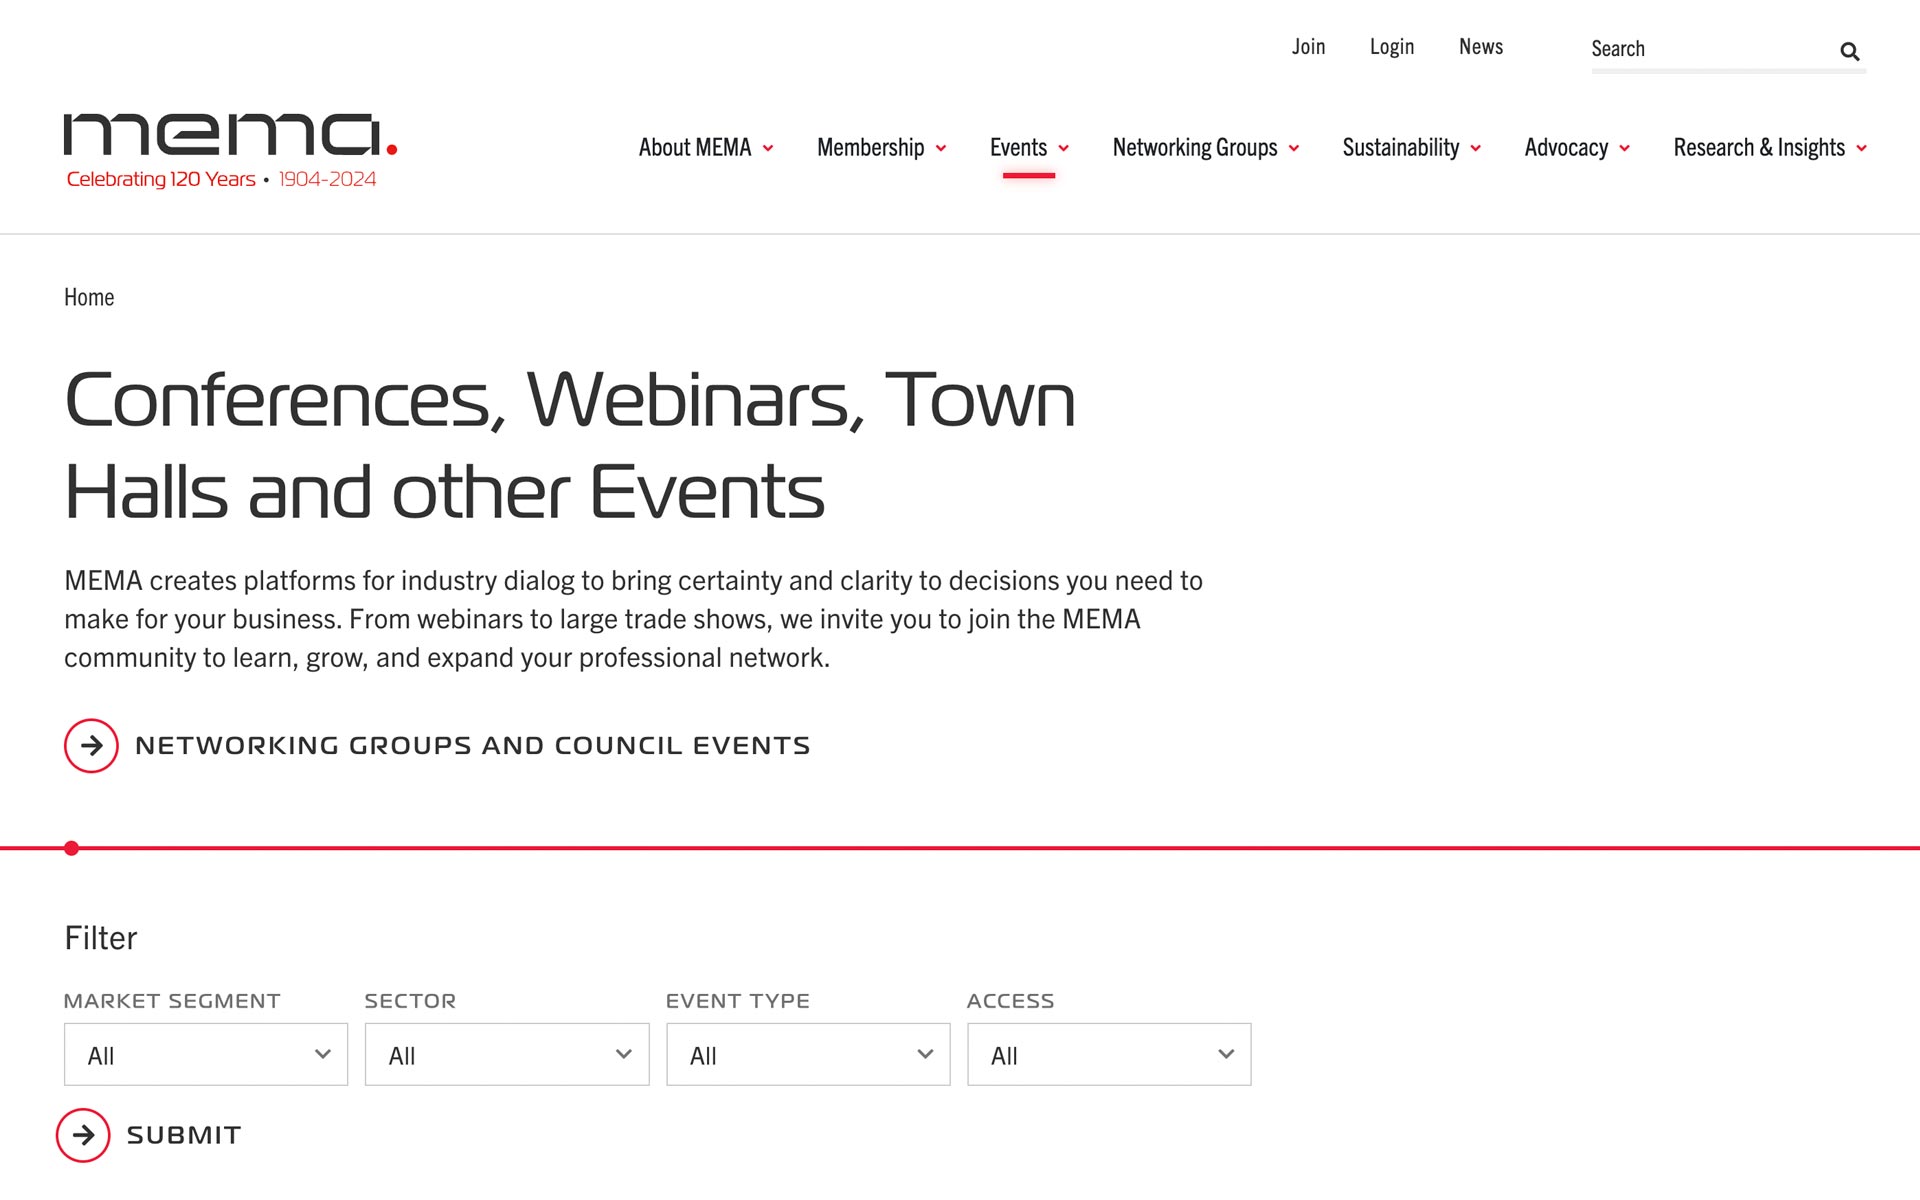 Conferences, Webinars, Town Halls, and other Events